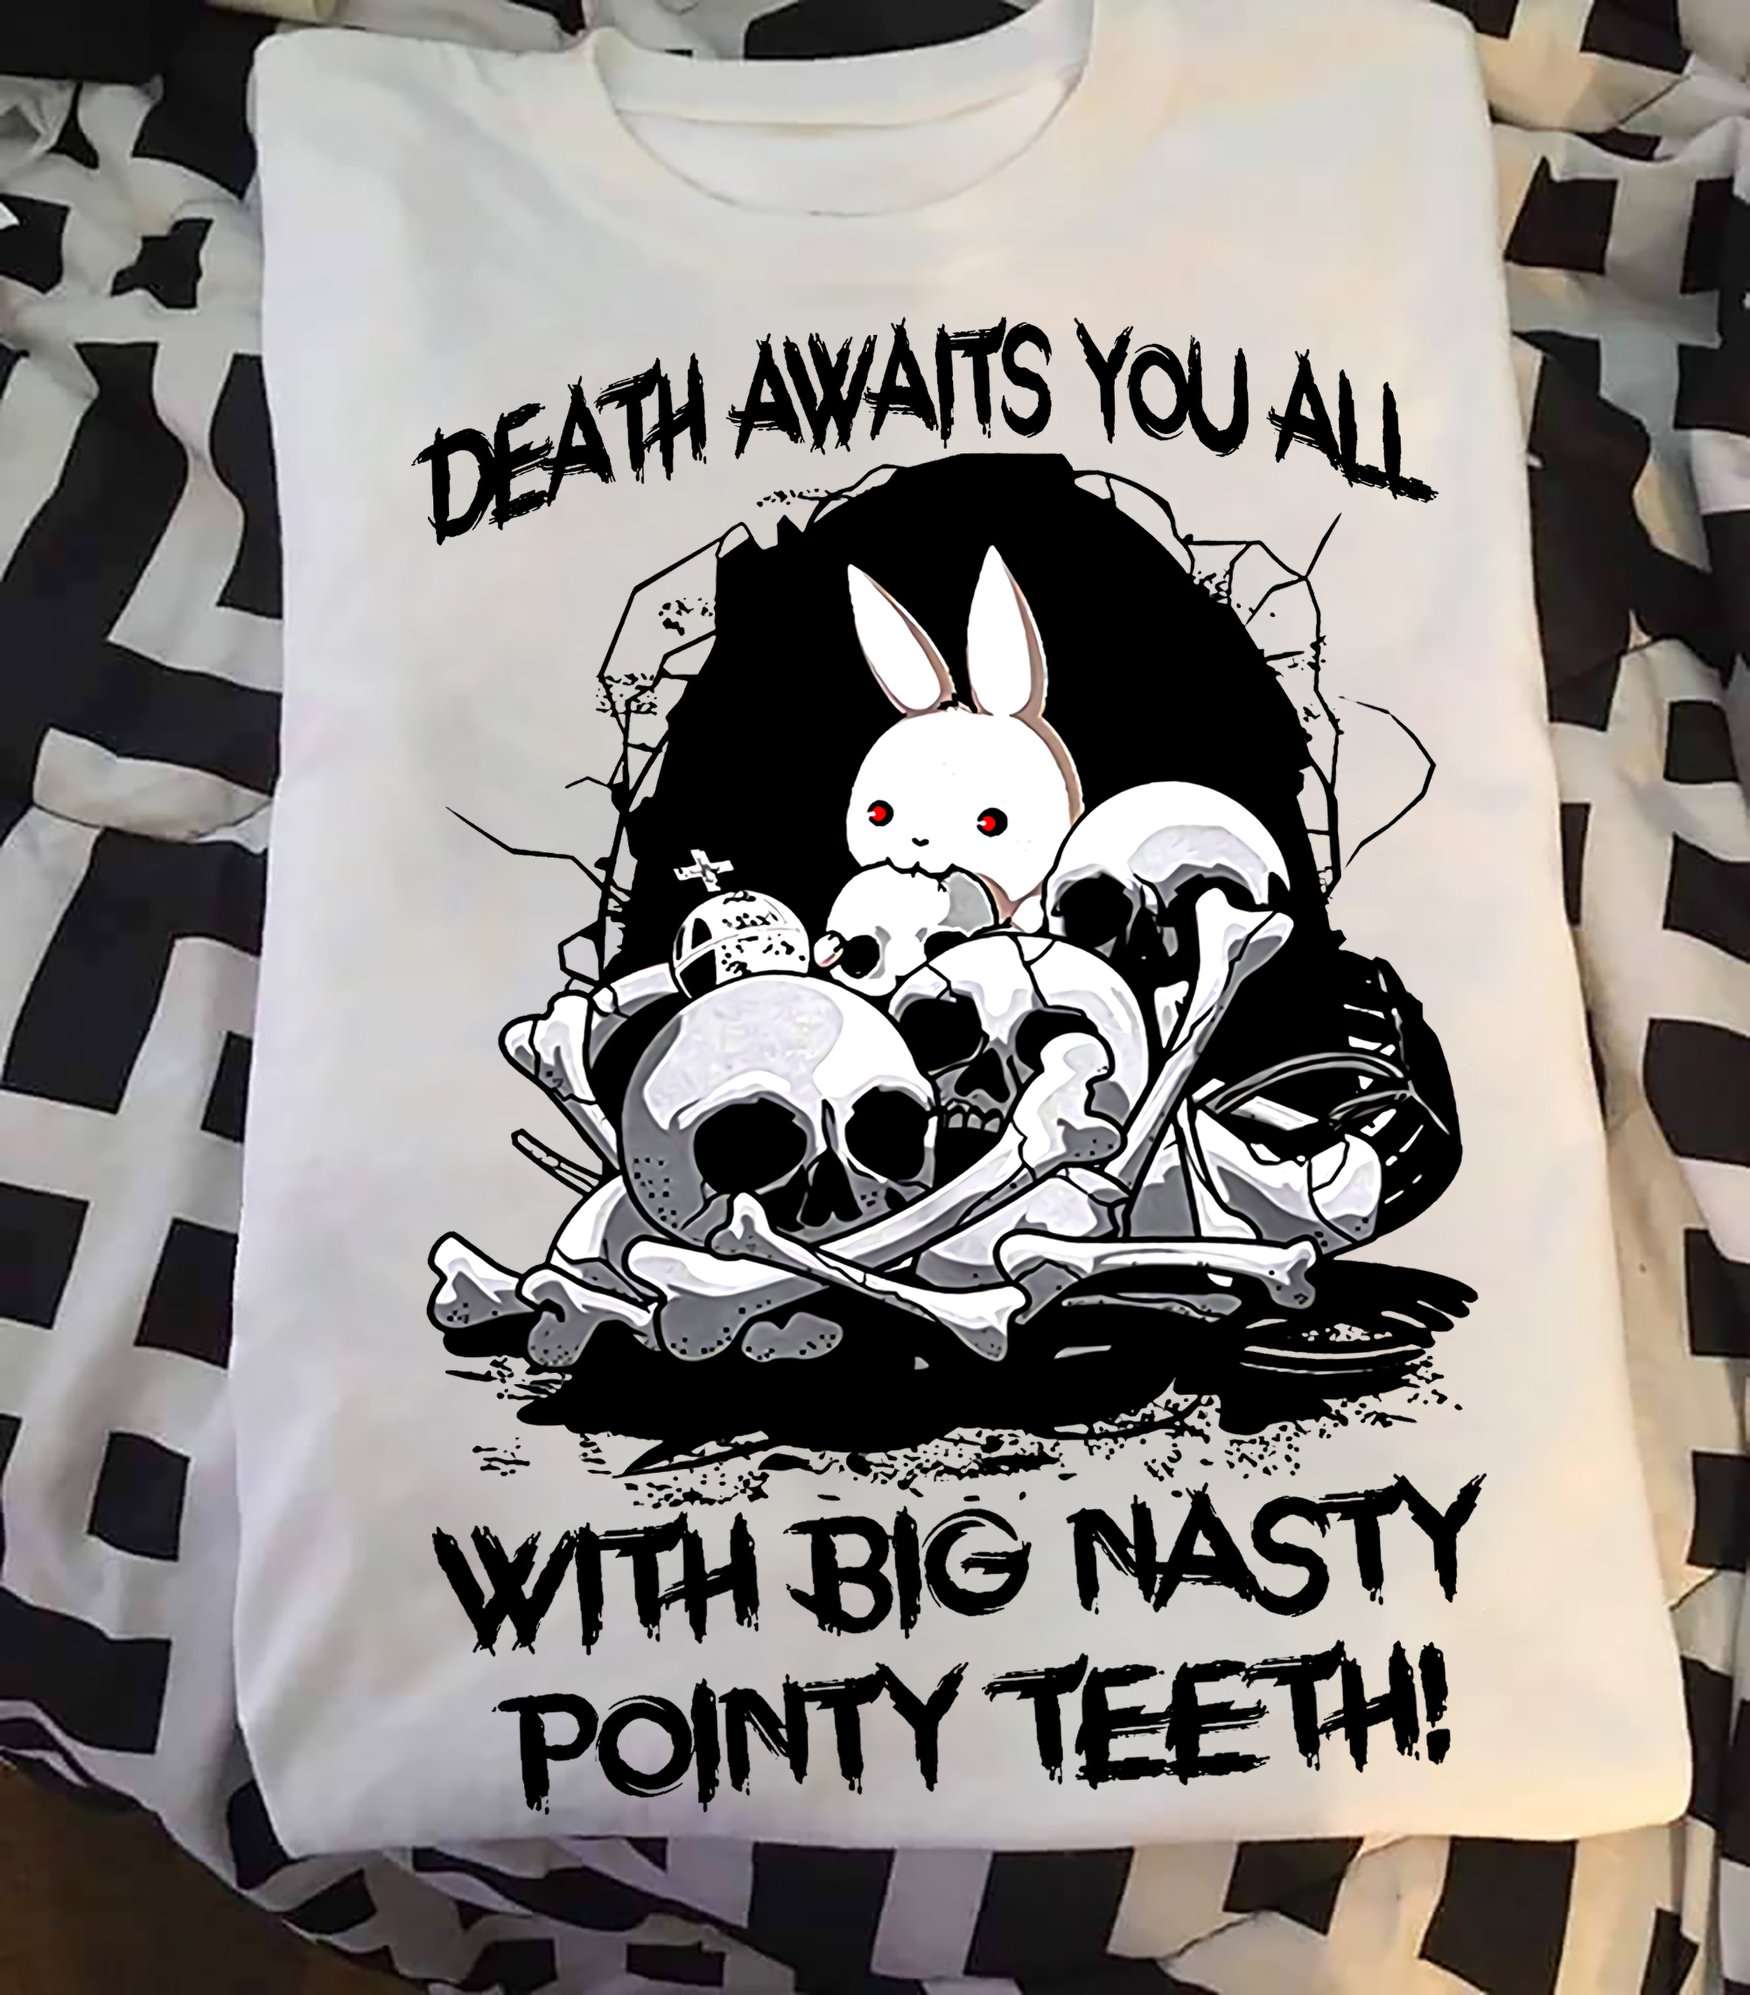 Death awaits you all with big nasty pointy teeth - Evil rabbit and skull